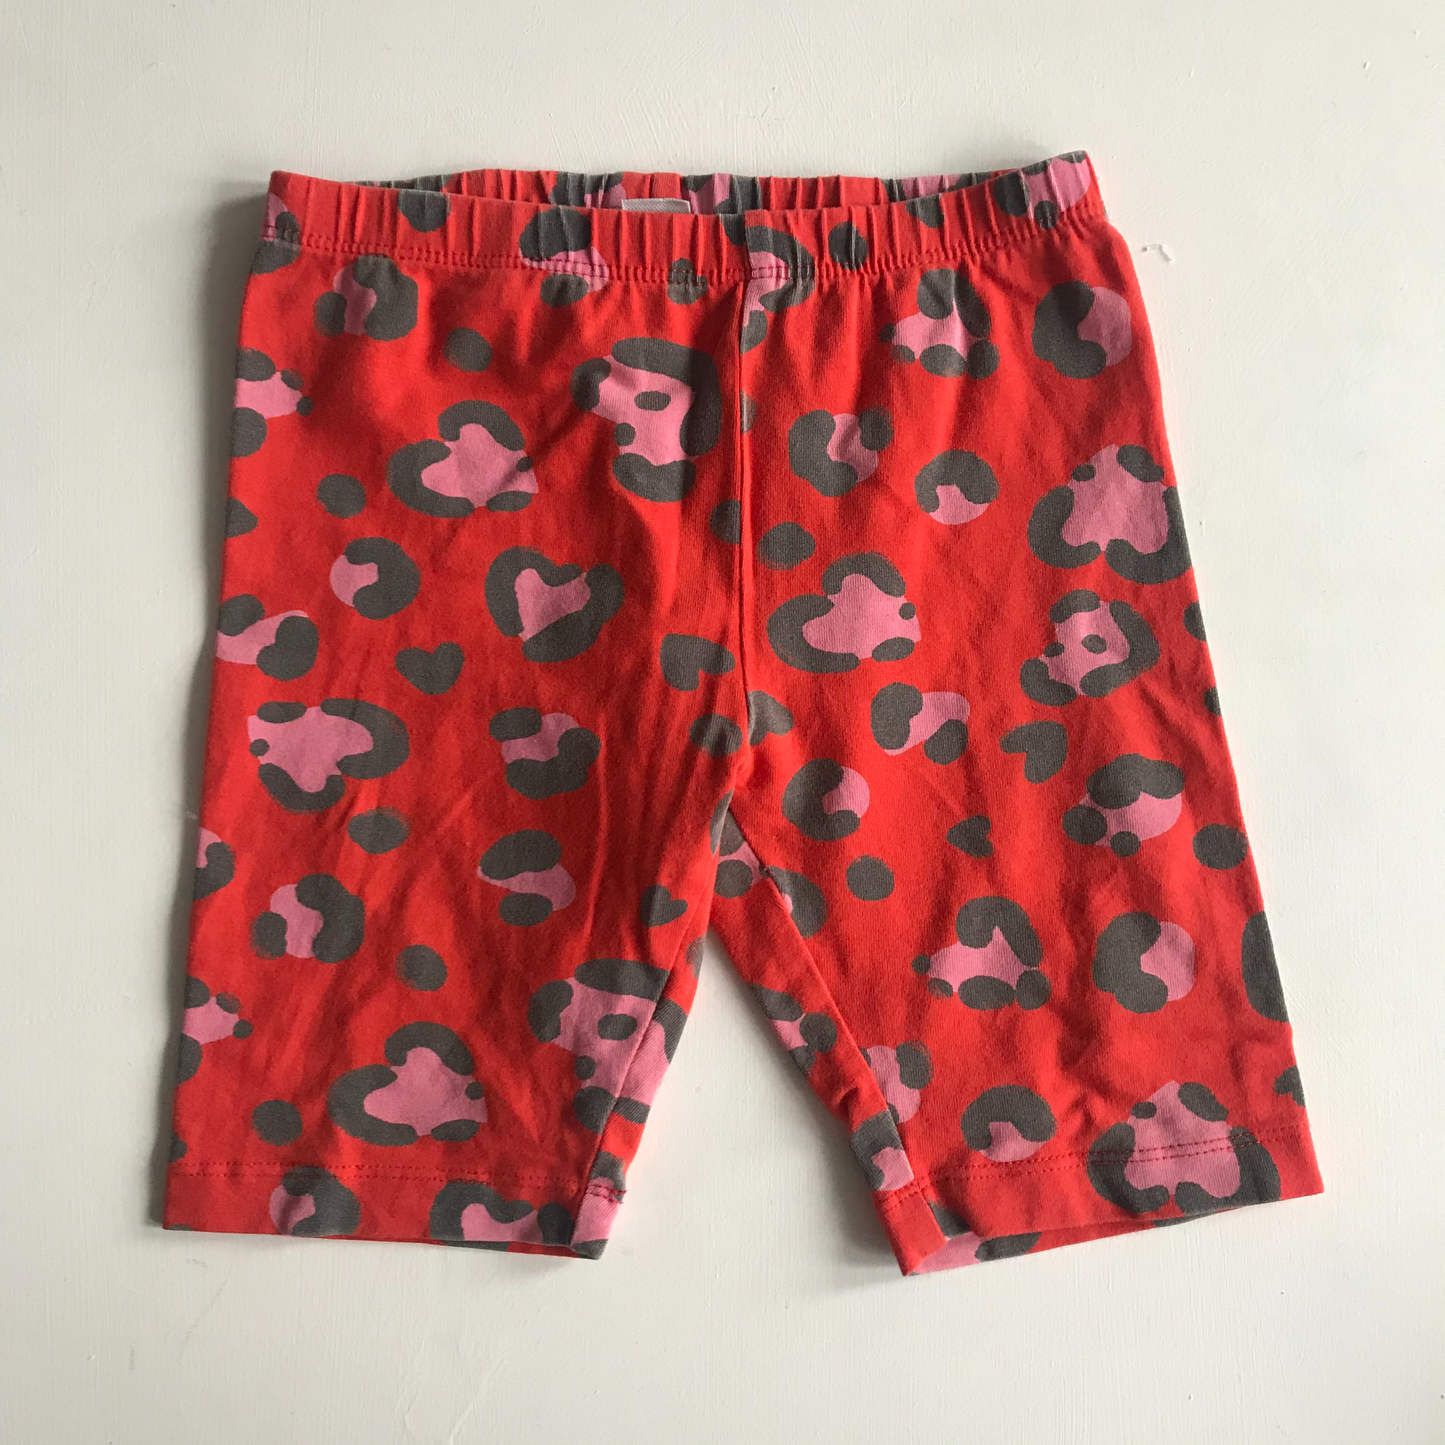 Denim Shorts and Red Animal Print Cycling Short-style Leggings Bundle Age 5